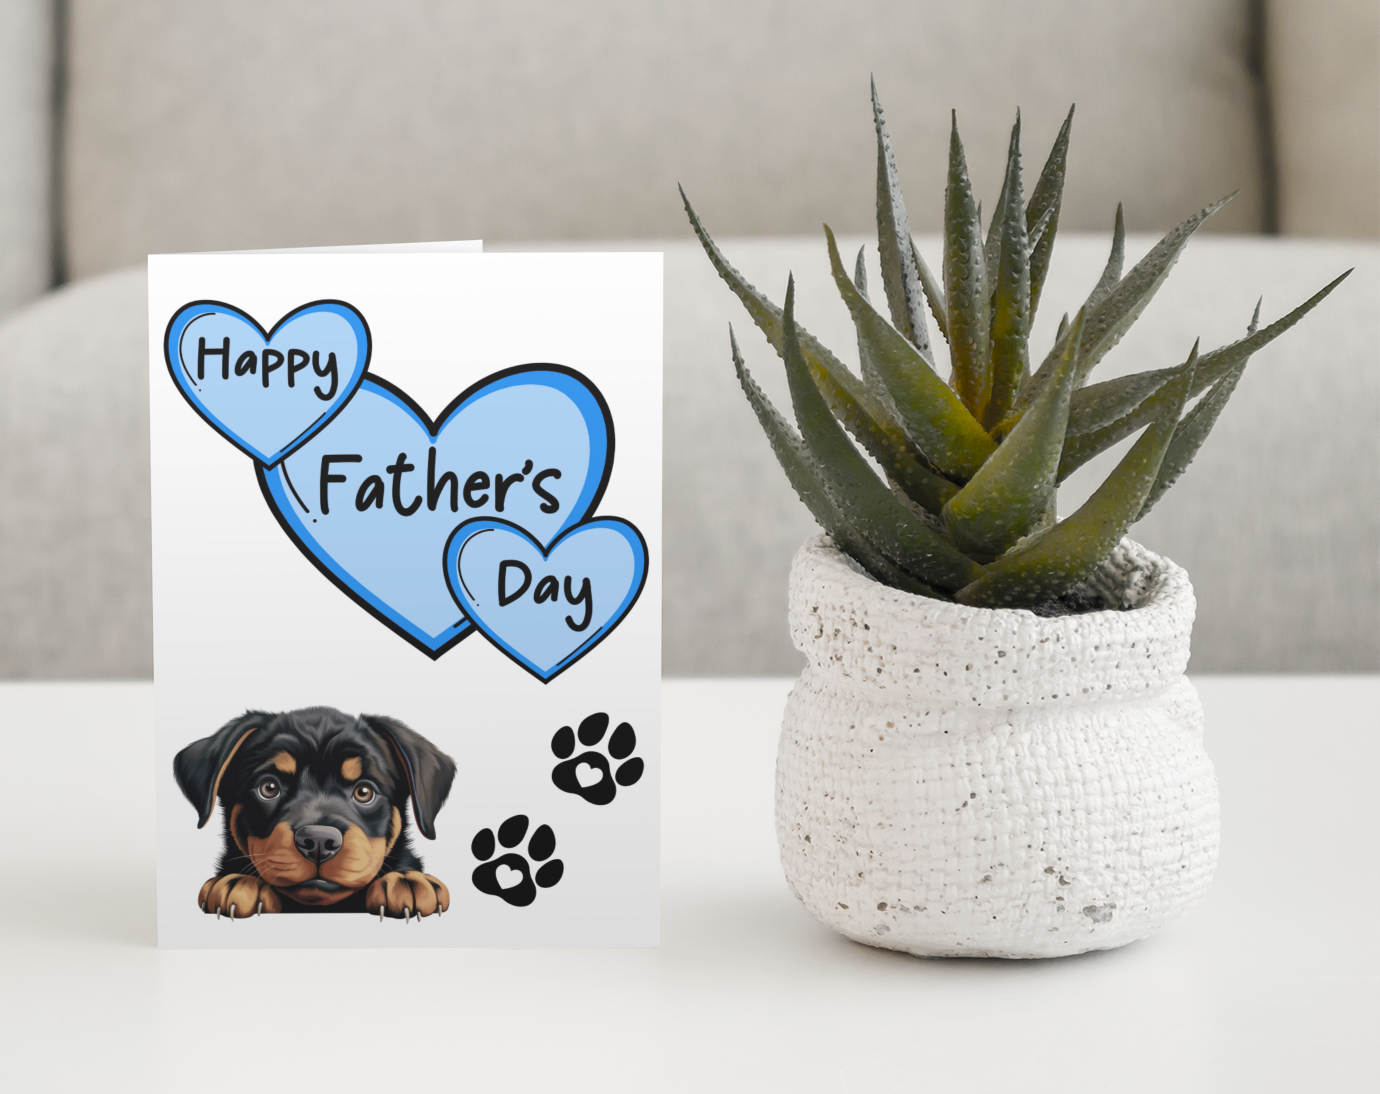 Rottweiler Rottie Father's Day Card - Nice Cute Fun Pet Dog Puppy Owner Novelty Greeting Card